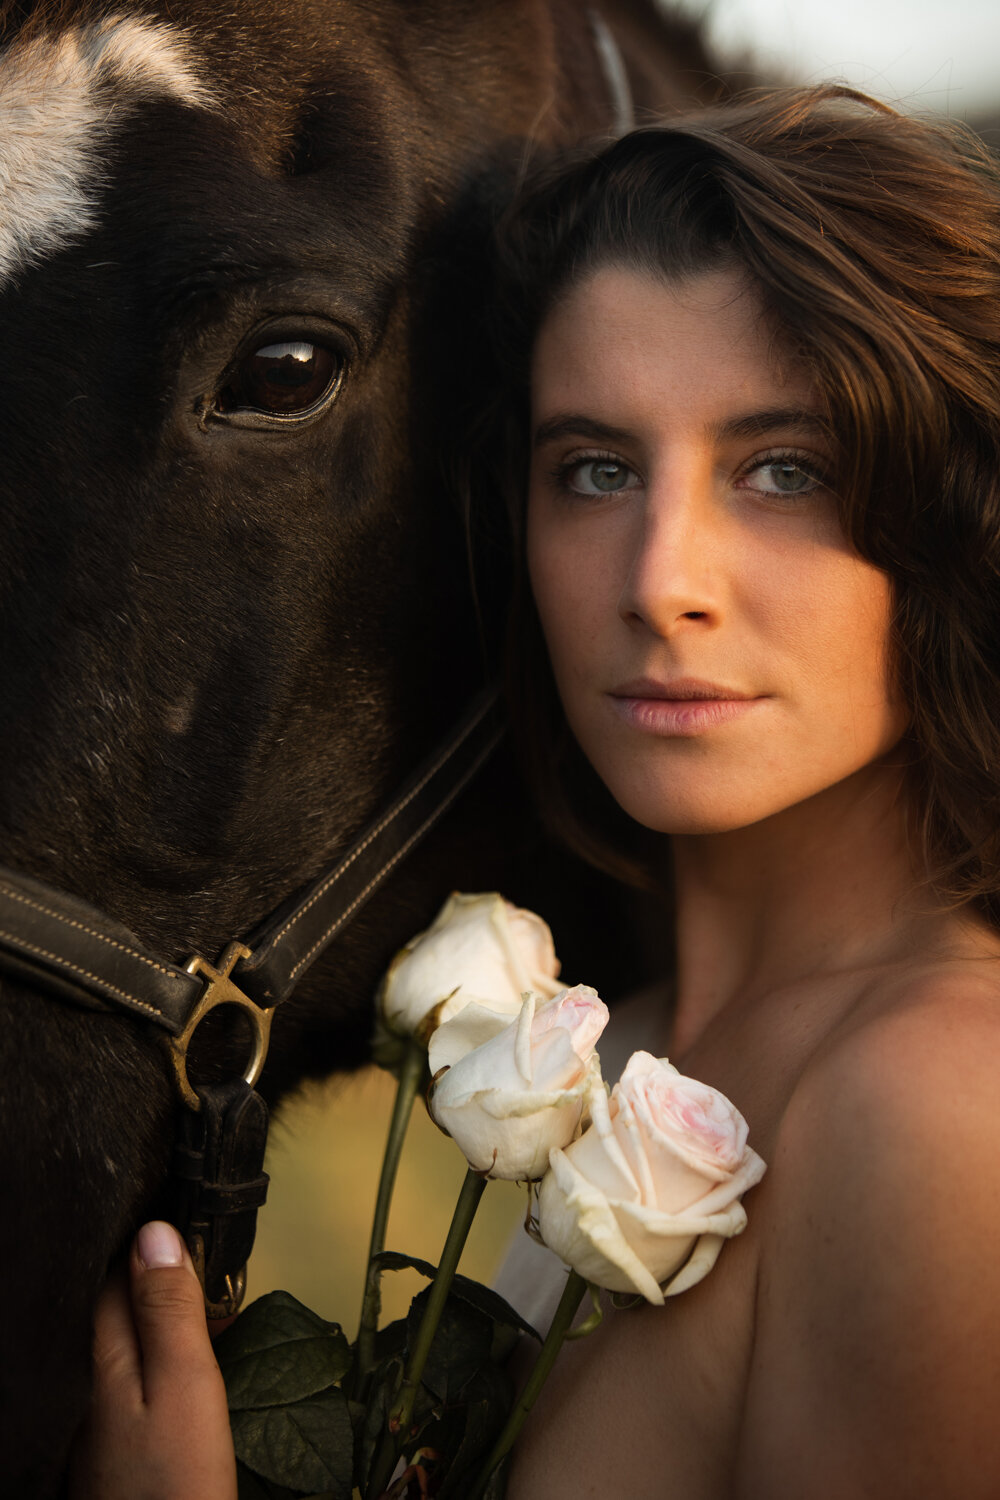 Immortale corsica corse beauty products beautiful horse model produits beaute beach travel Krista Espino sea island mediterranean photographe photographer fashion lifestyle editorial nature natural france french skin skincare face mask rose country-34.jpg